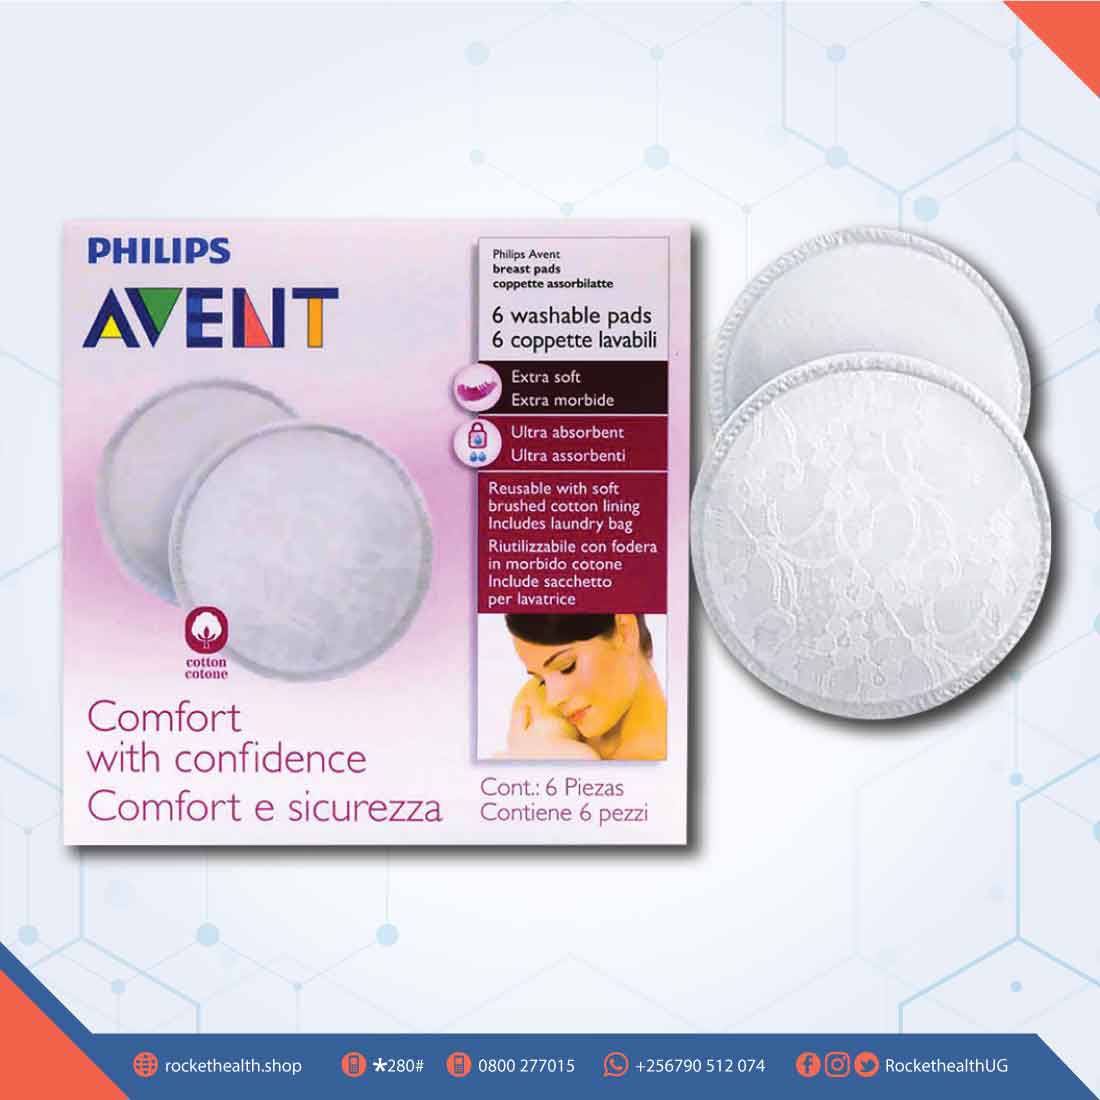 Avent Breast Pads, Washable - 6 pads